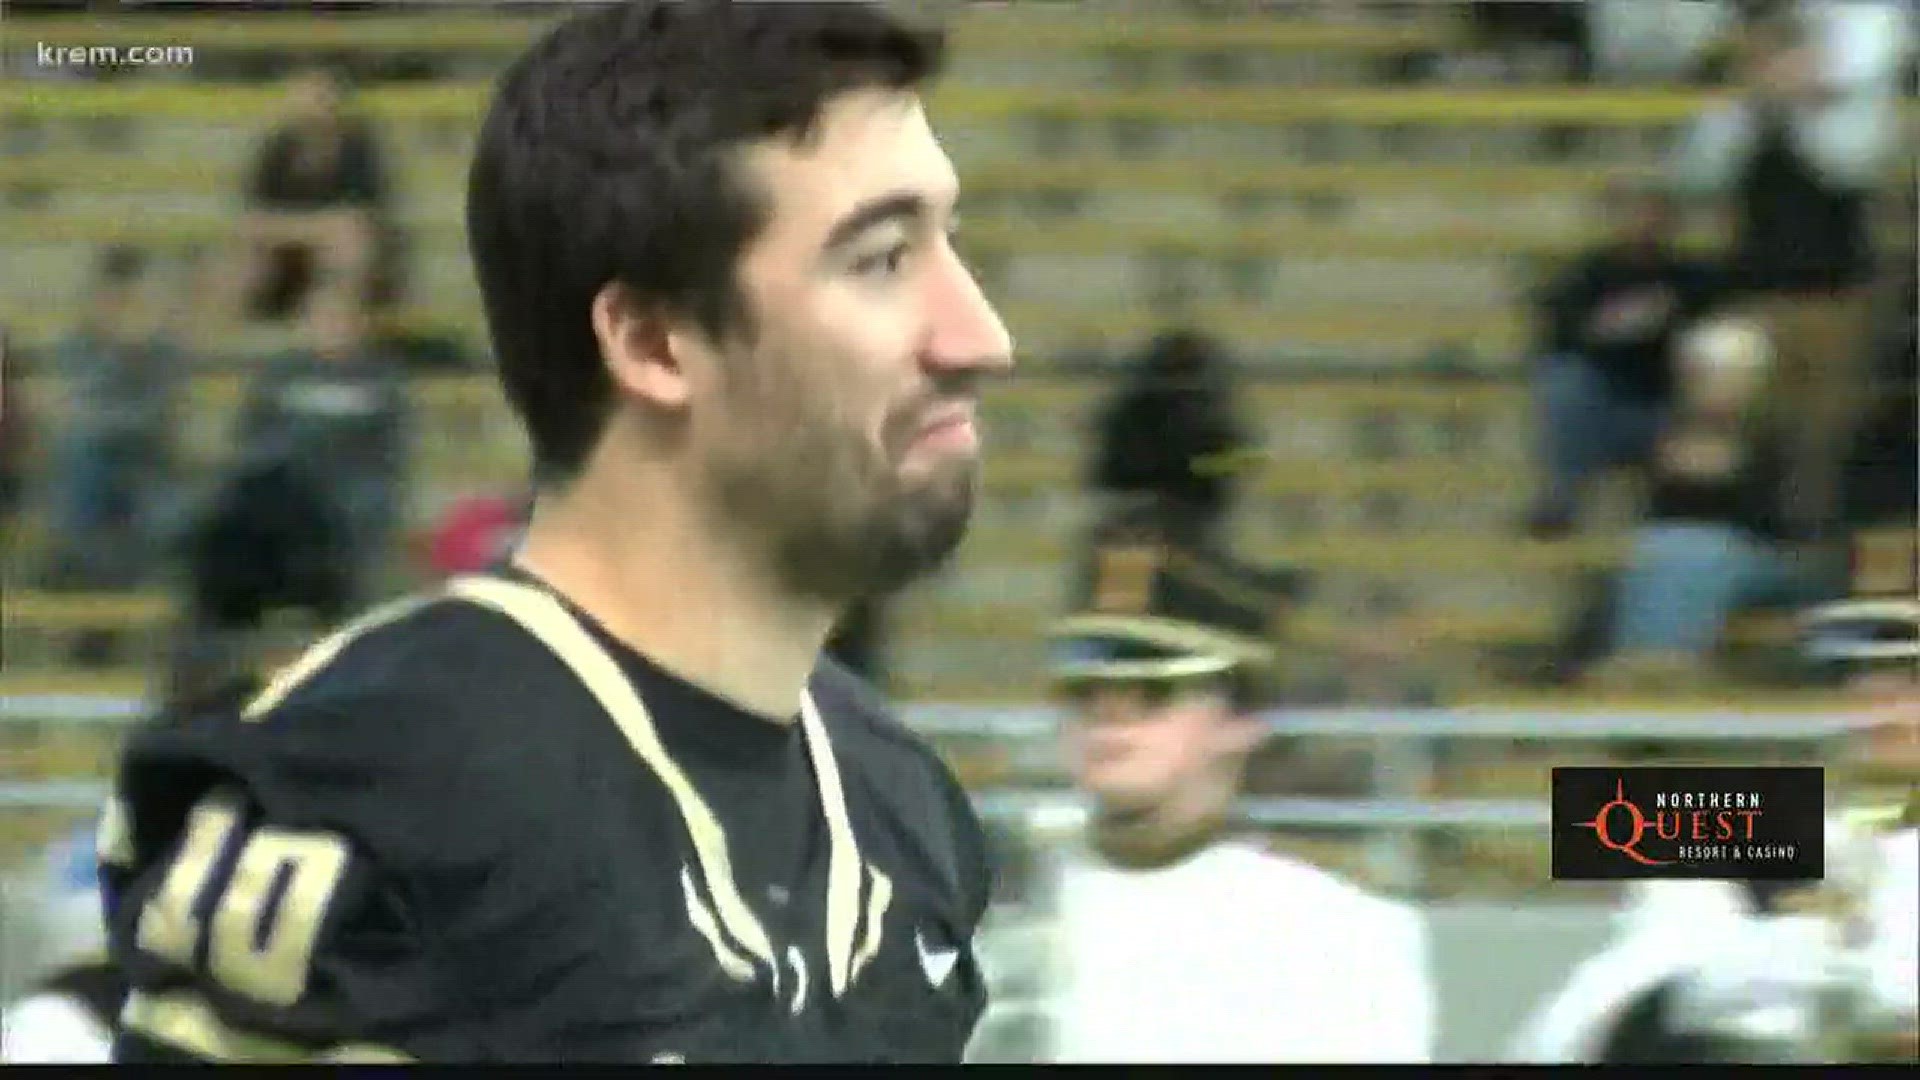 Matt Linehan's final game at the Kibbie Dome was from the sidelines, as the Vandals couldn't get any offense going with him out. The Vandals lose 13-7 and are not bowl eligible.